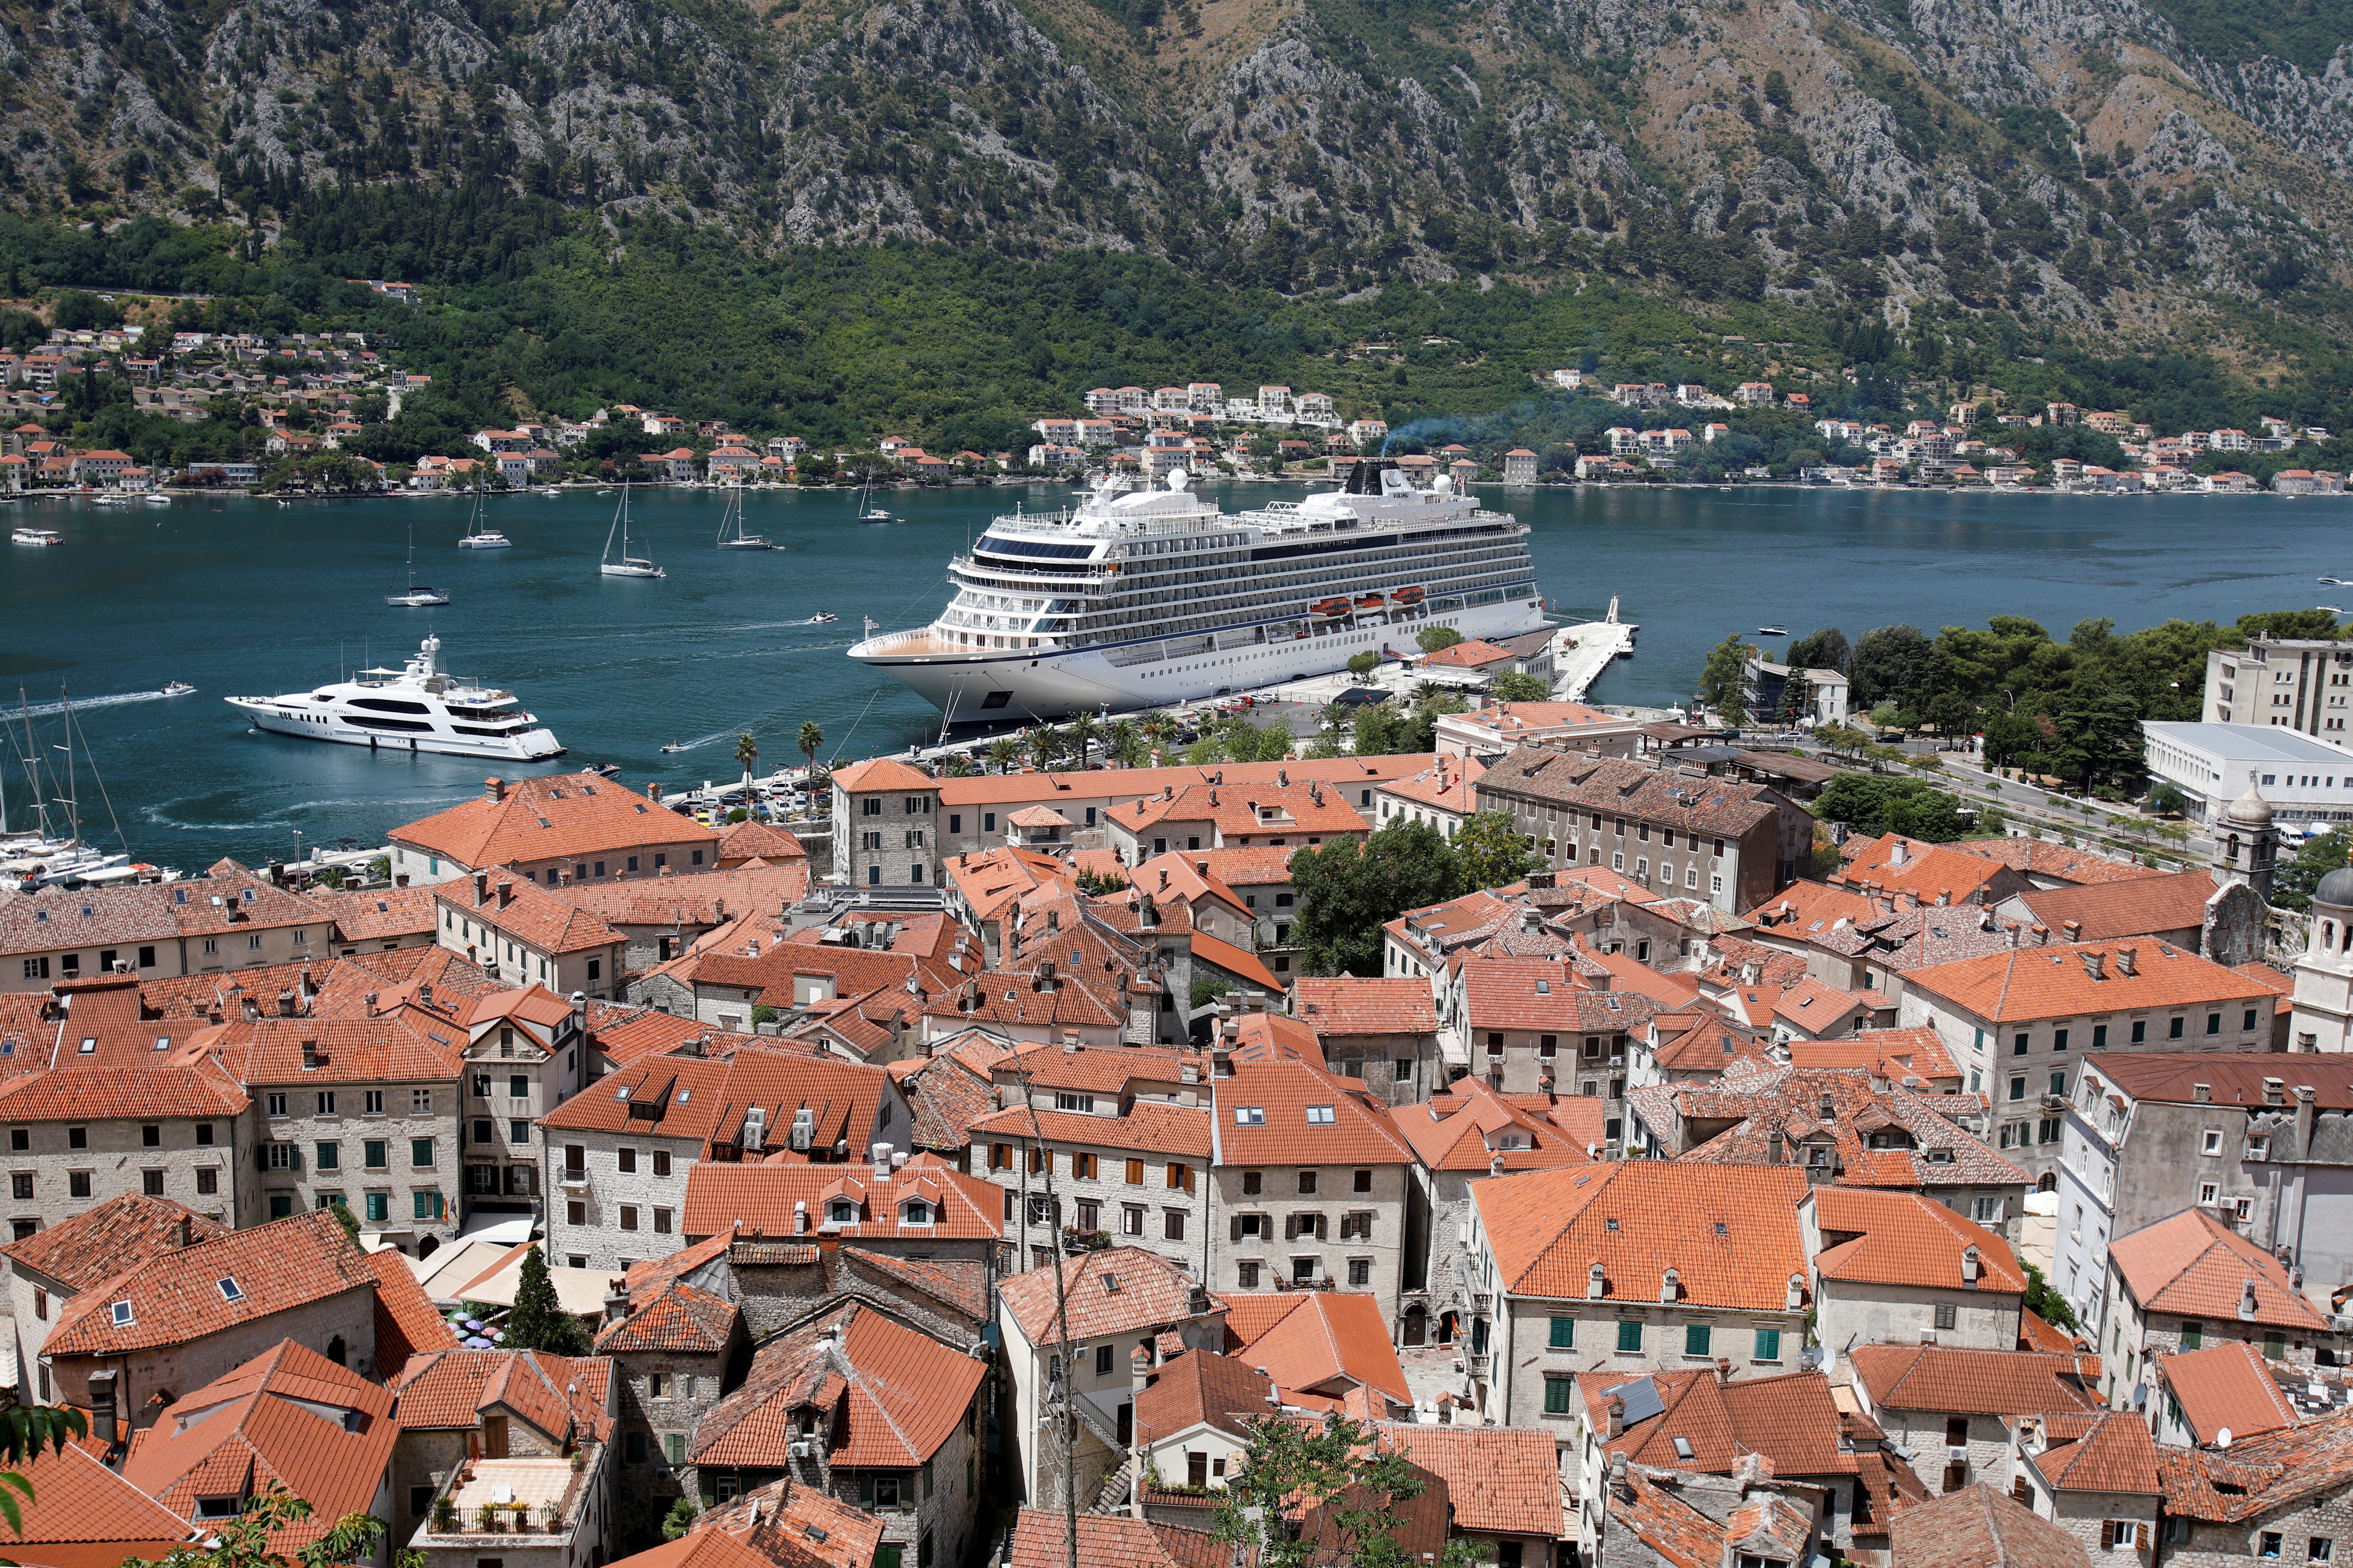 Norwegian mega cruise ship is docked in front of Old Town of Kotor